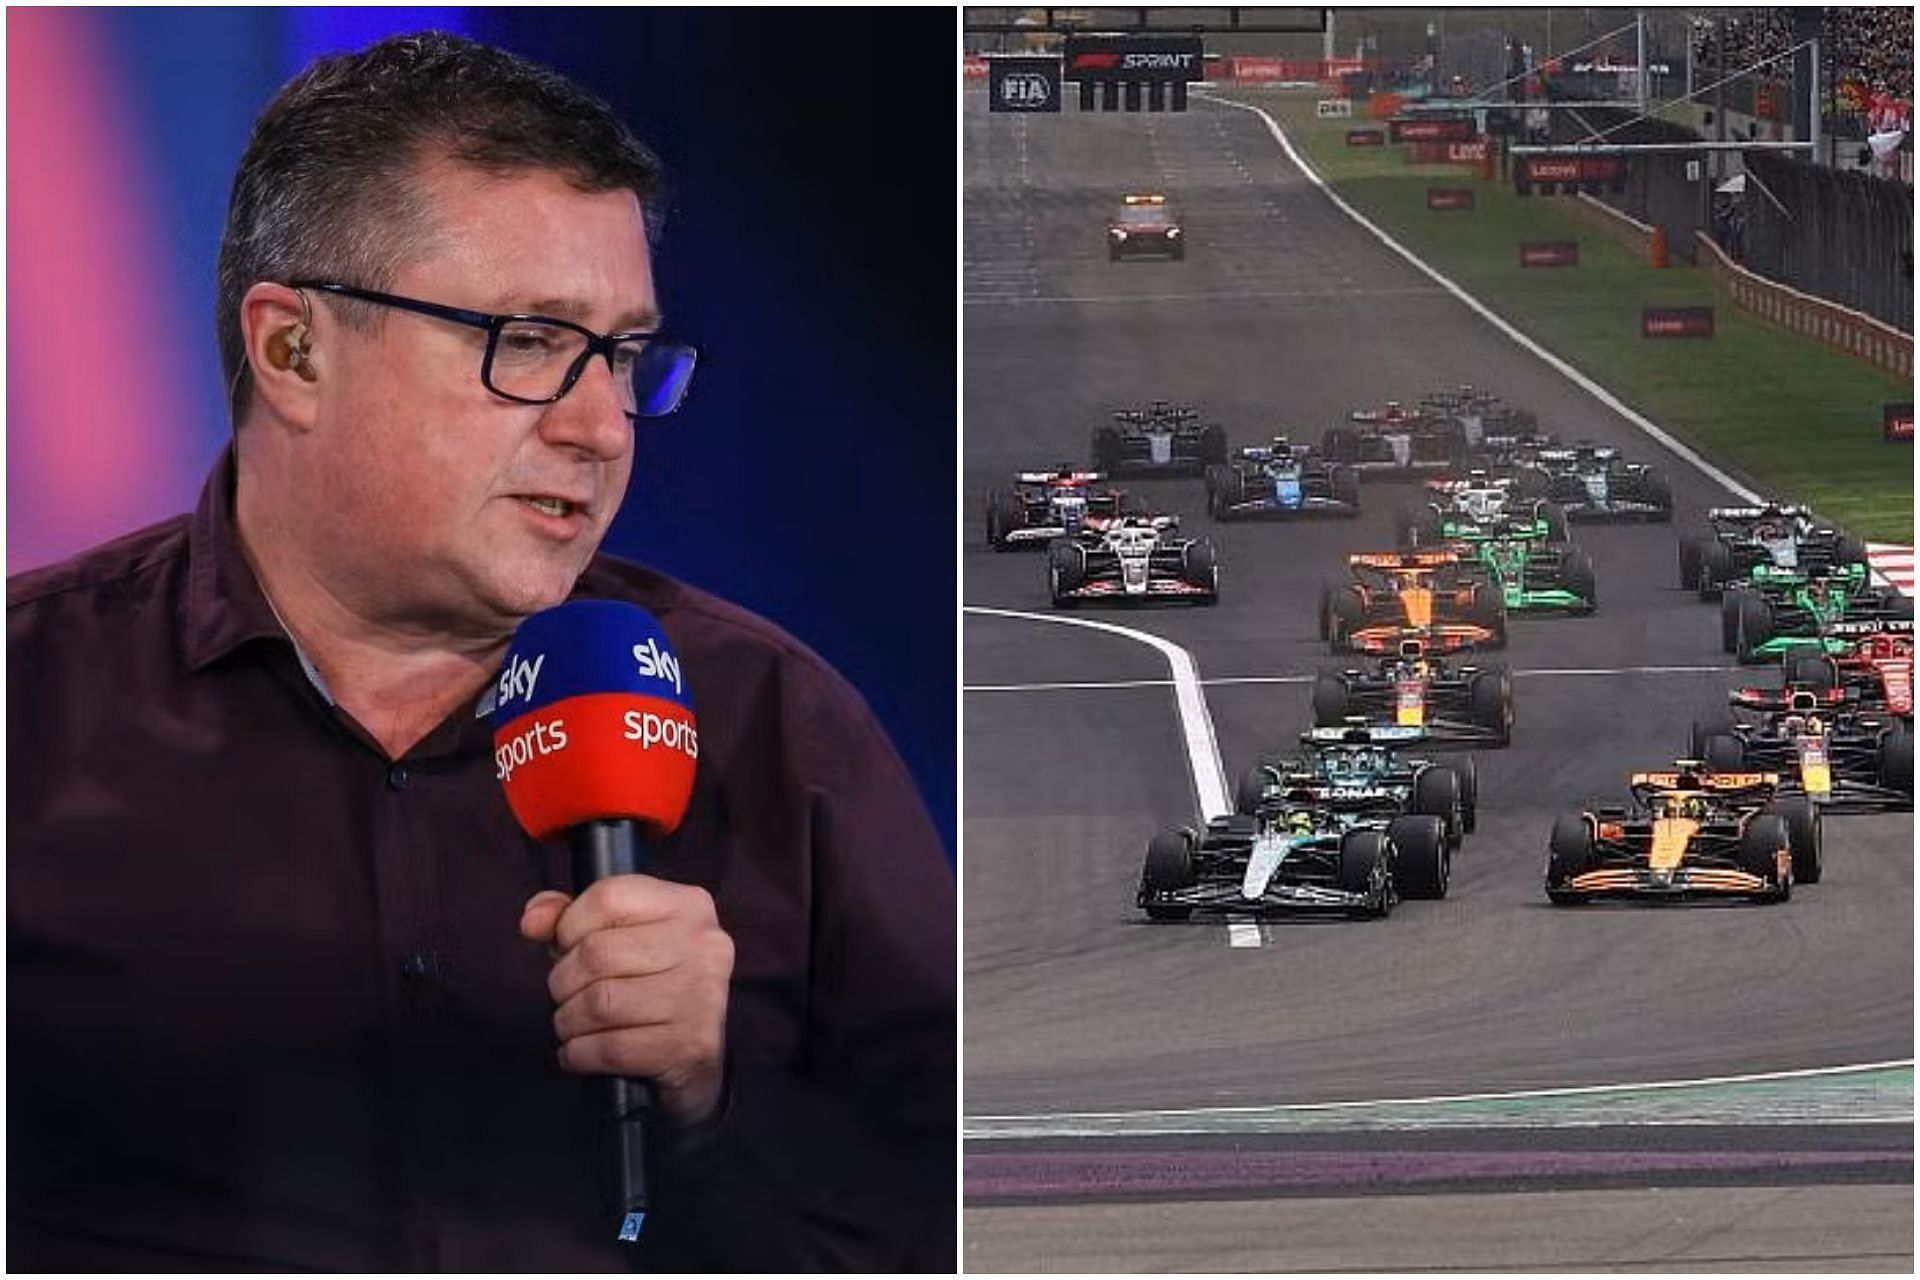 David Croft shared his views on new points system in F1 (Collage via Sportskeeda)